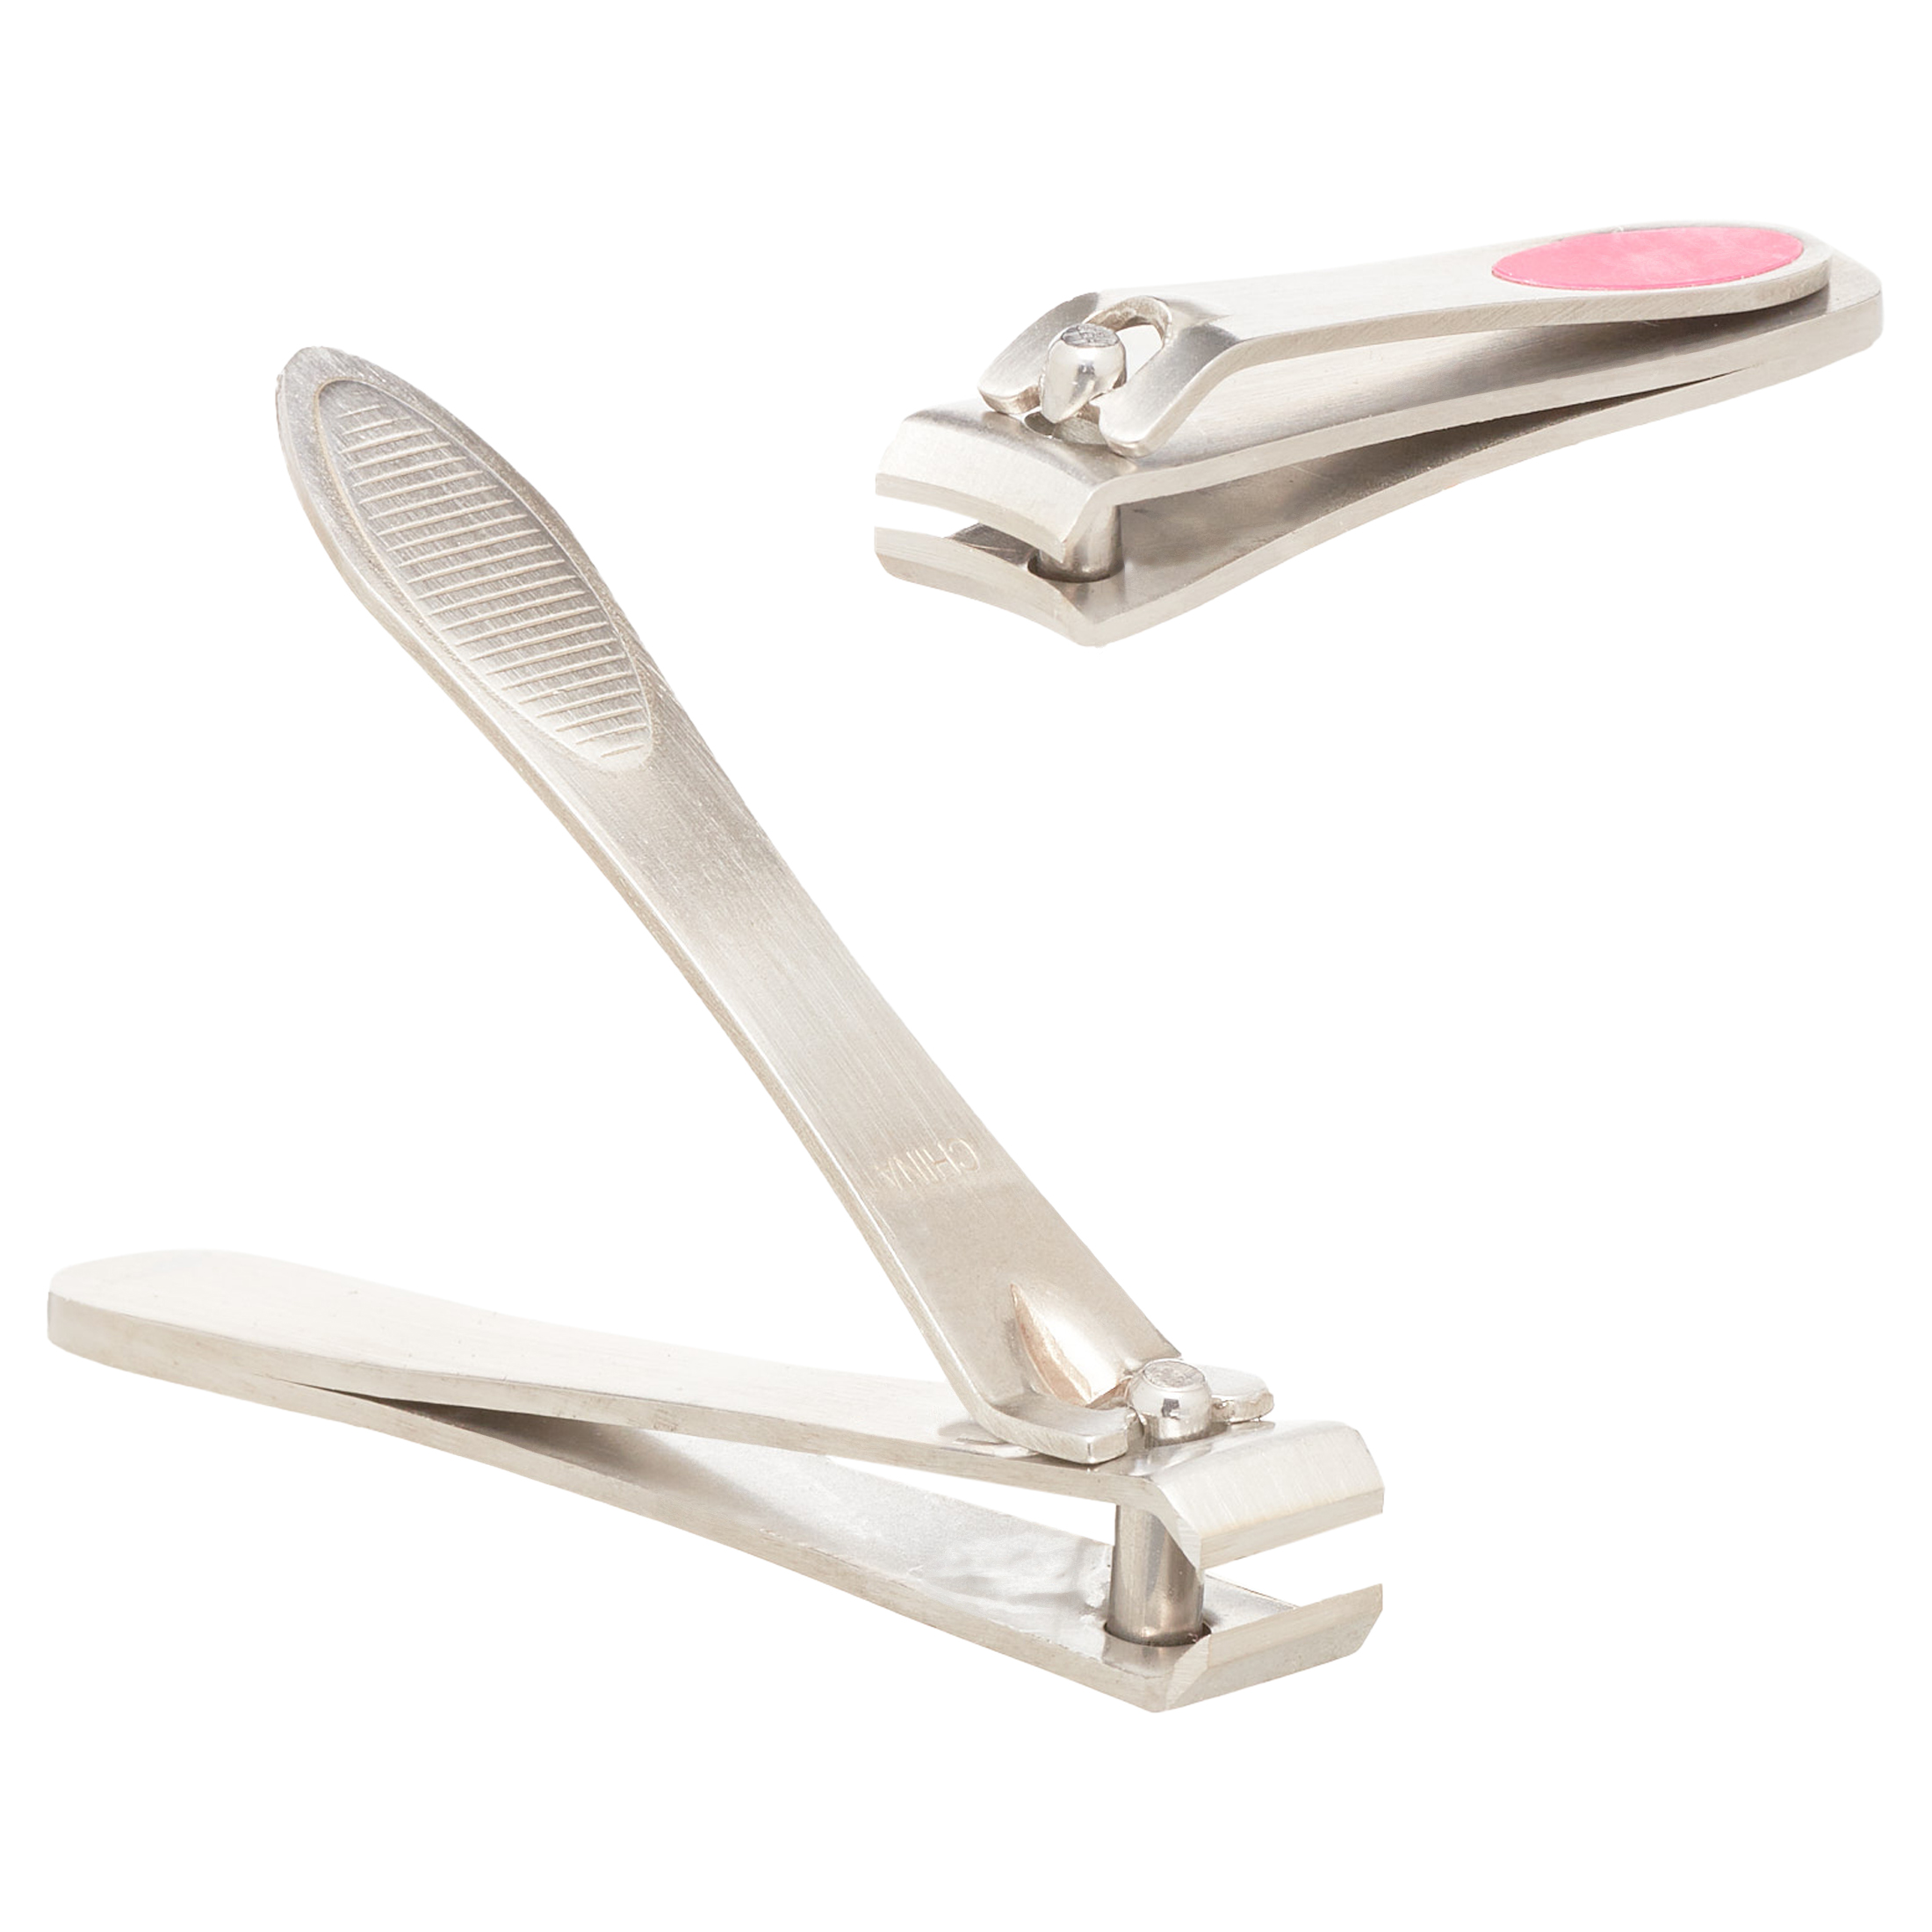 Trim Nail Care Stainless Steel Fingernail & Toenail Clippers, 2 Pieces - image 4 of 7